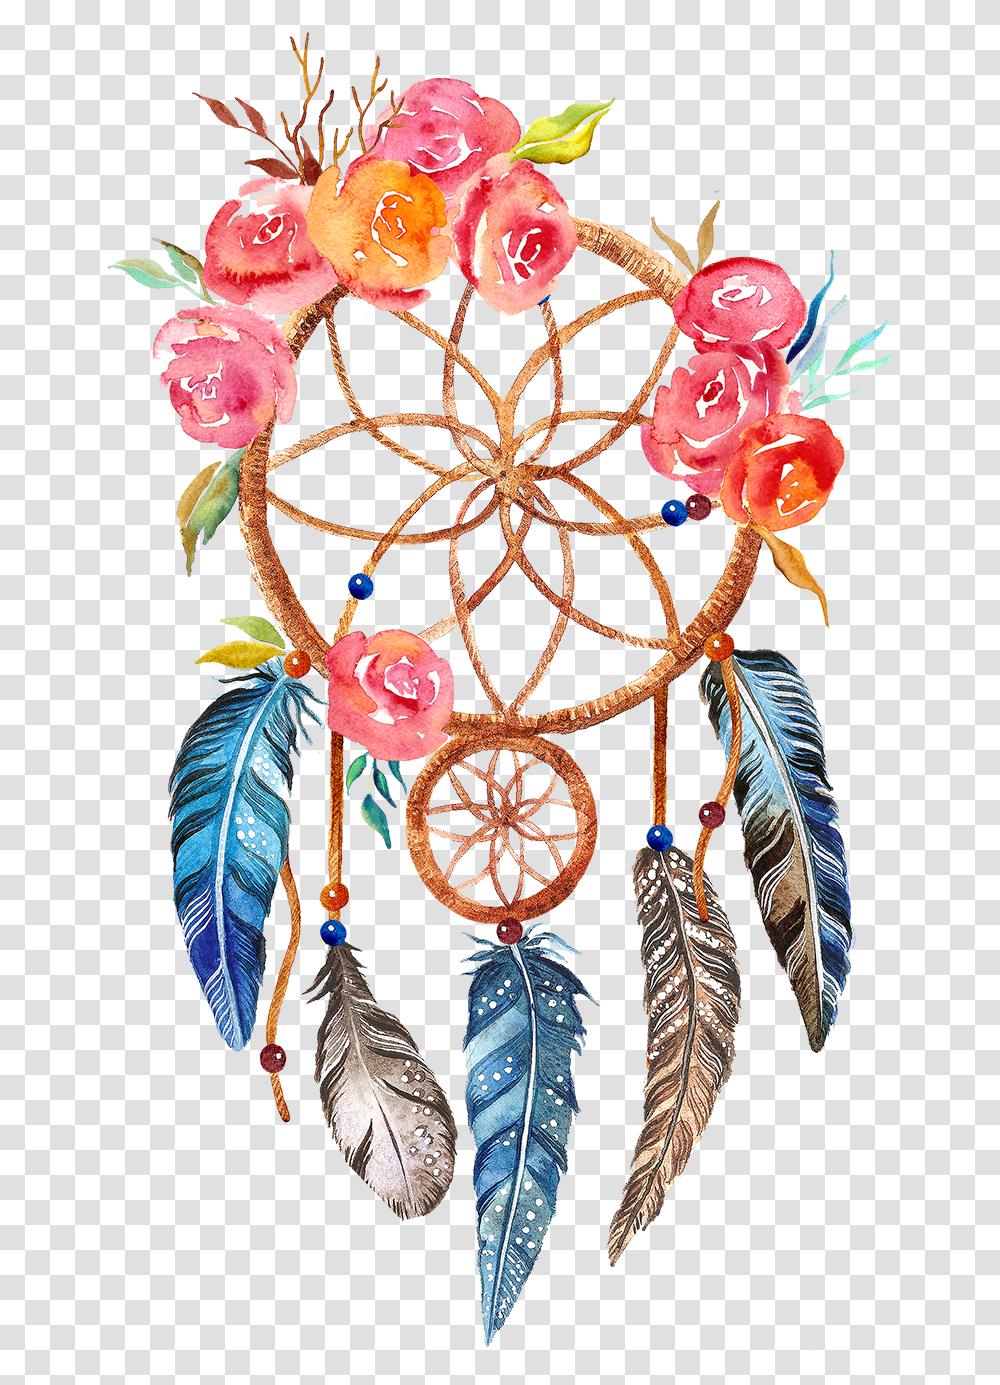 Freetoedit Ftestickers Report Abuse Tattoo Image Dream Catcher, Pattern, Embroidery, Floral Design Transparent Png